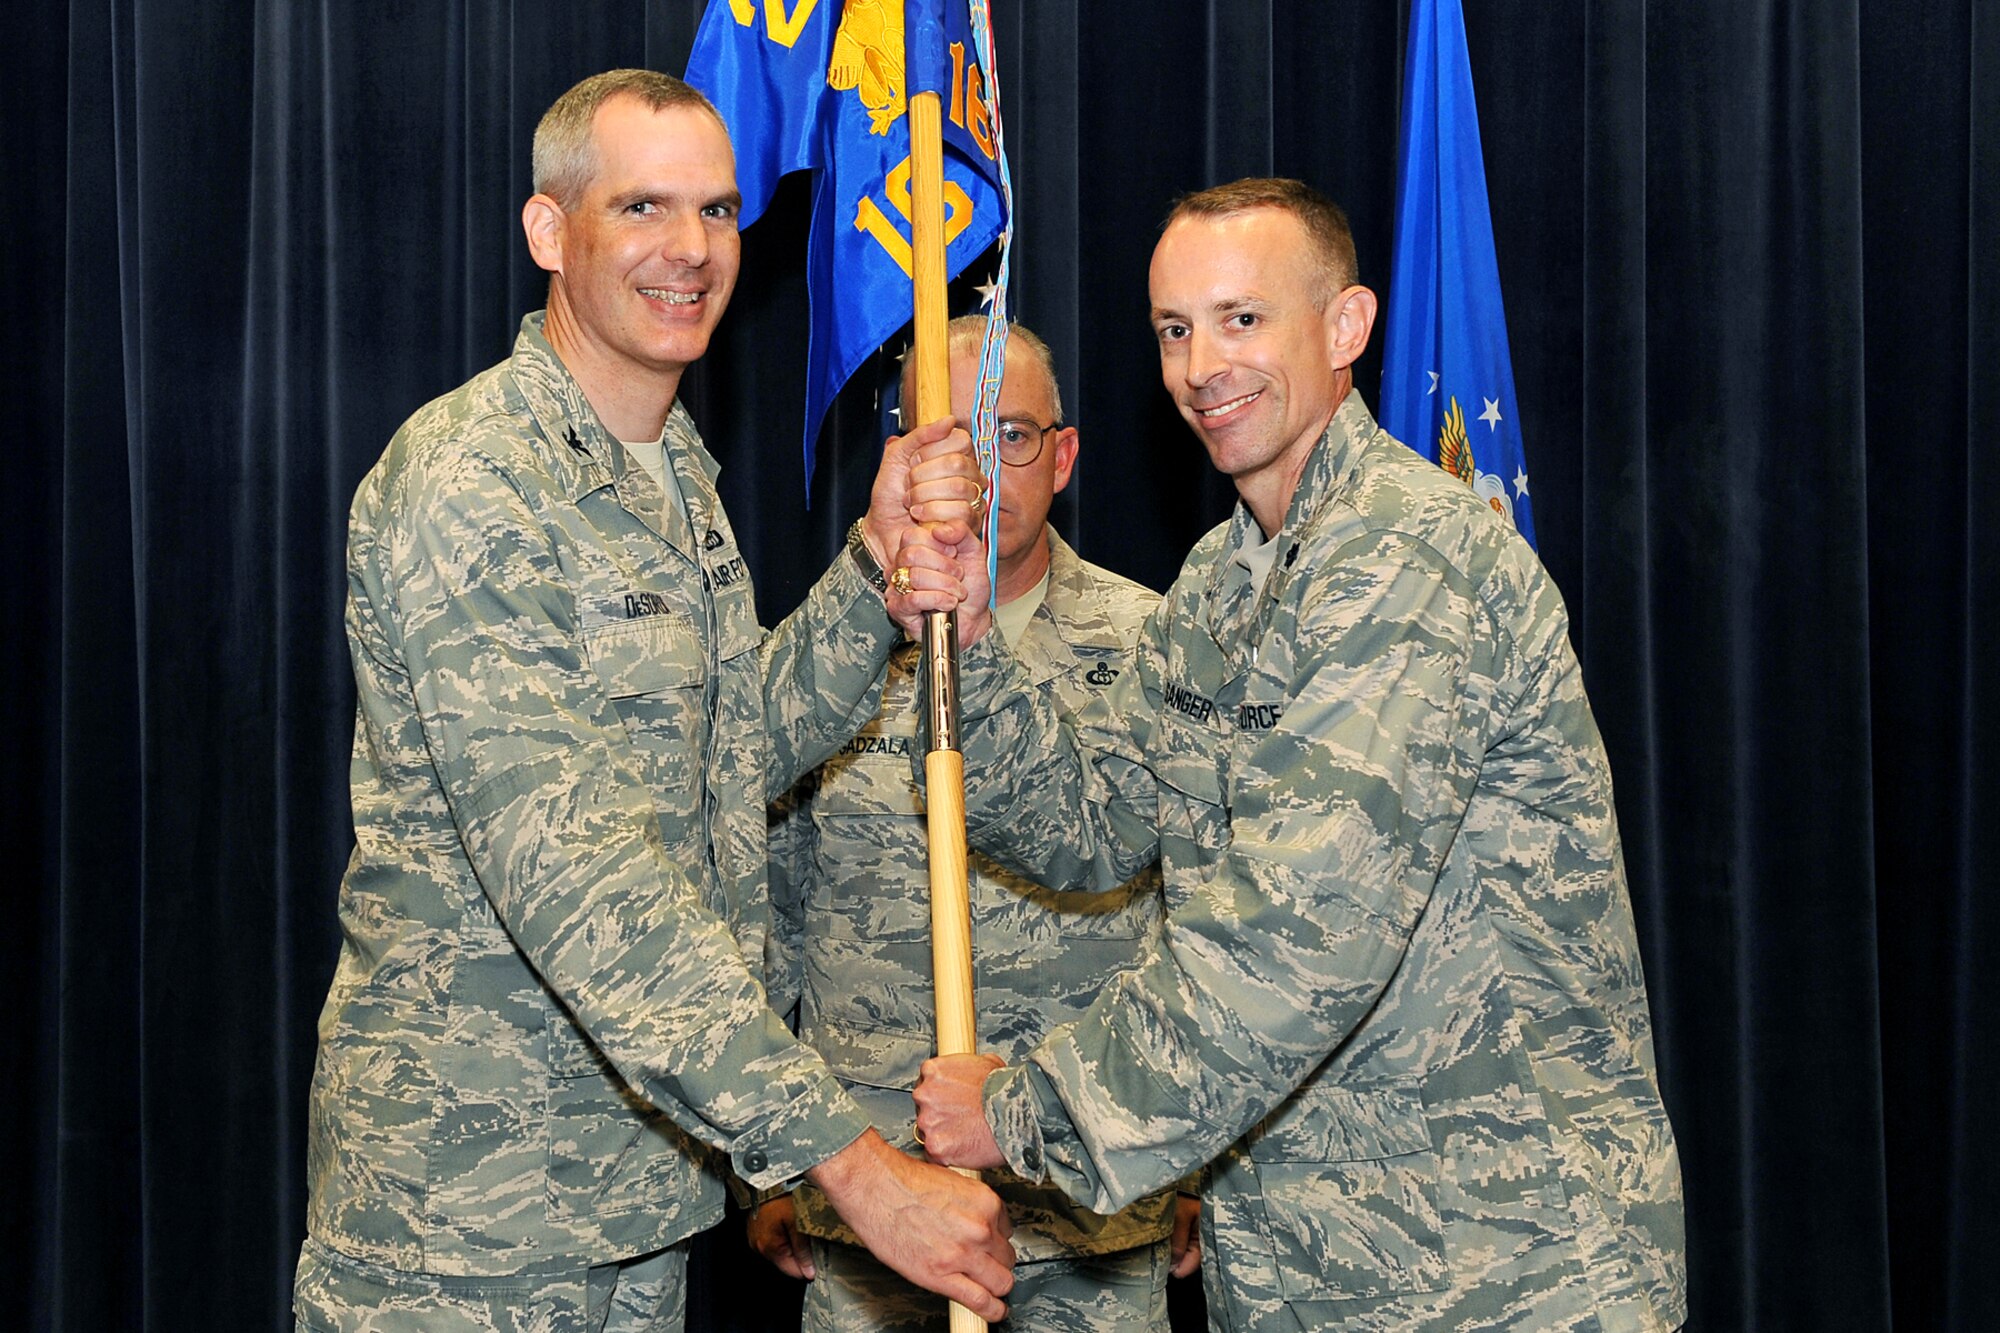 U.S. Air Force Lt. Col Neil Sanger, 16th Weather Squadron commander, relinquishes command and passes the guidon to Col. Steven DeSordi, 2nd Weather Group commander, during a change of command ceremony inside the Air Force Weather Agency auditorium on Offutt Air Force Base, Neb., on July 11. 

(U.S. Air Force Photo by Charles Haymond/Released)
